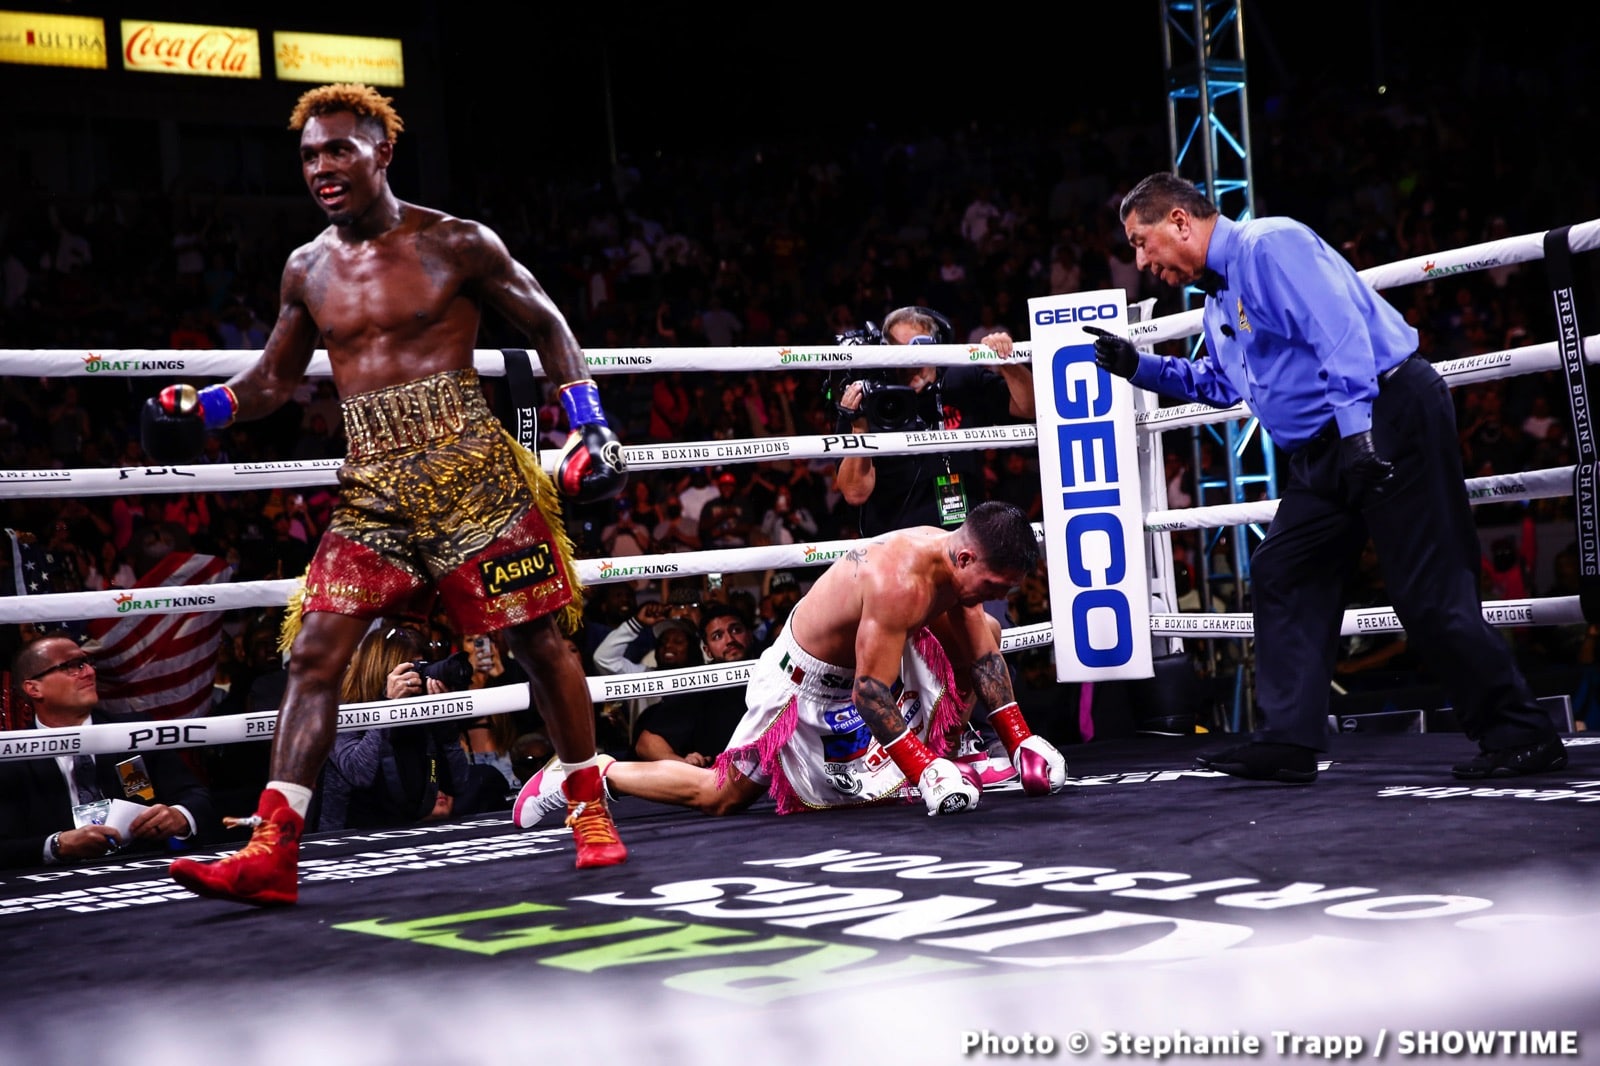 Jermell Charlo: "I made history, you got to respect me now"